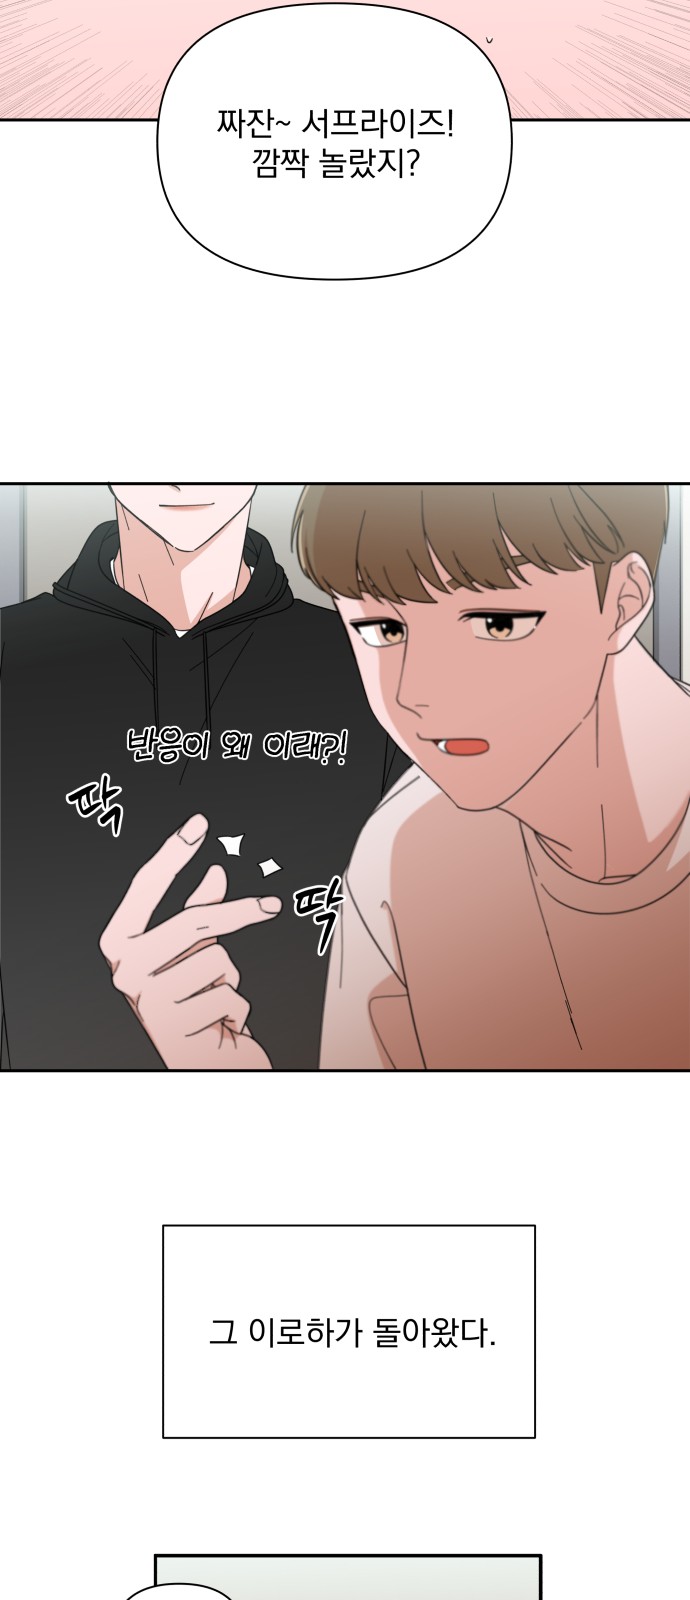 The Man With Pretty Lips - Chapter 1 - Page 68